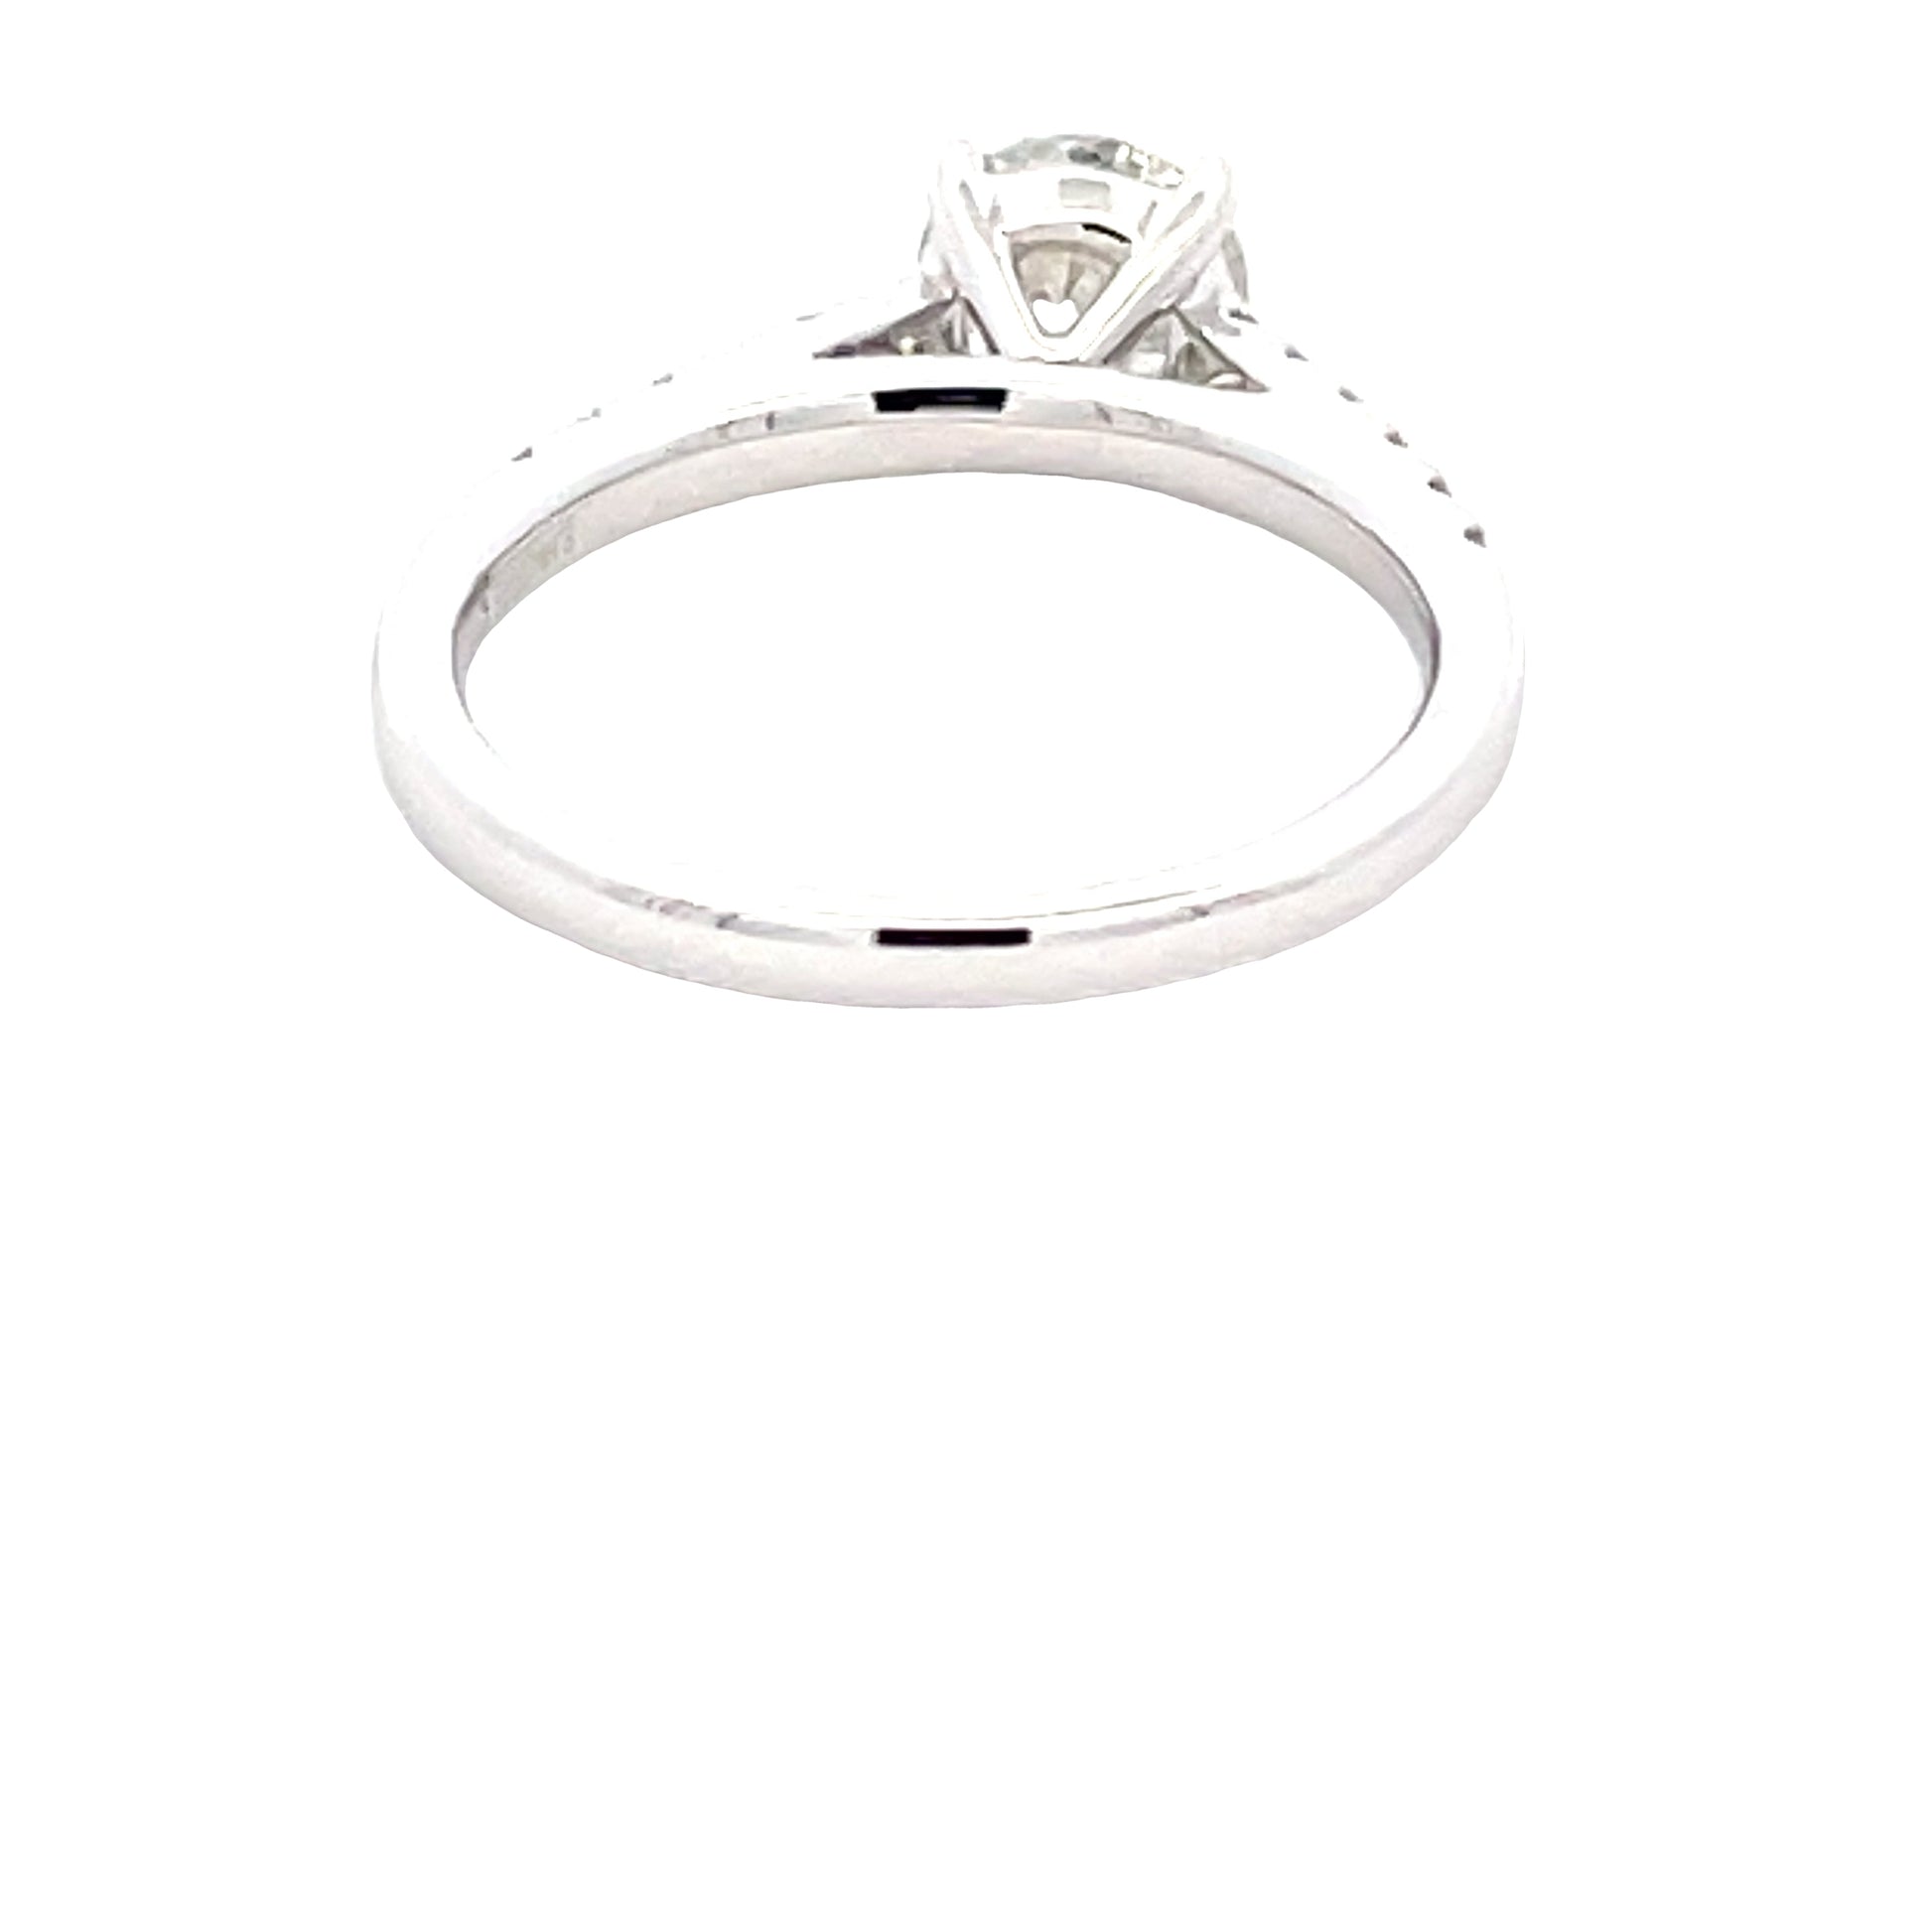 Round Brilliant Cut Diamond Solitaire with Diamond set Shoulders - 1.25cts  Gardiner Brothers   